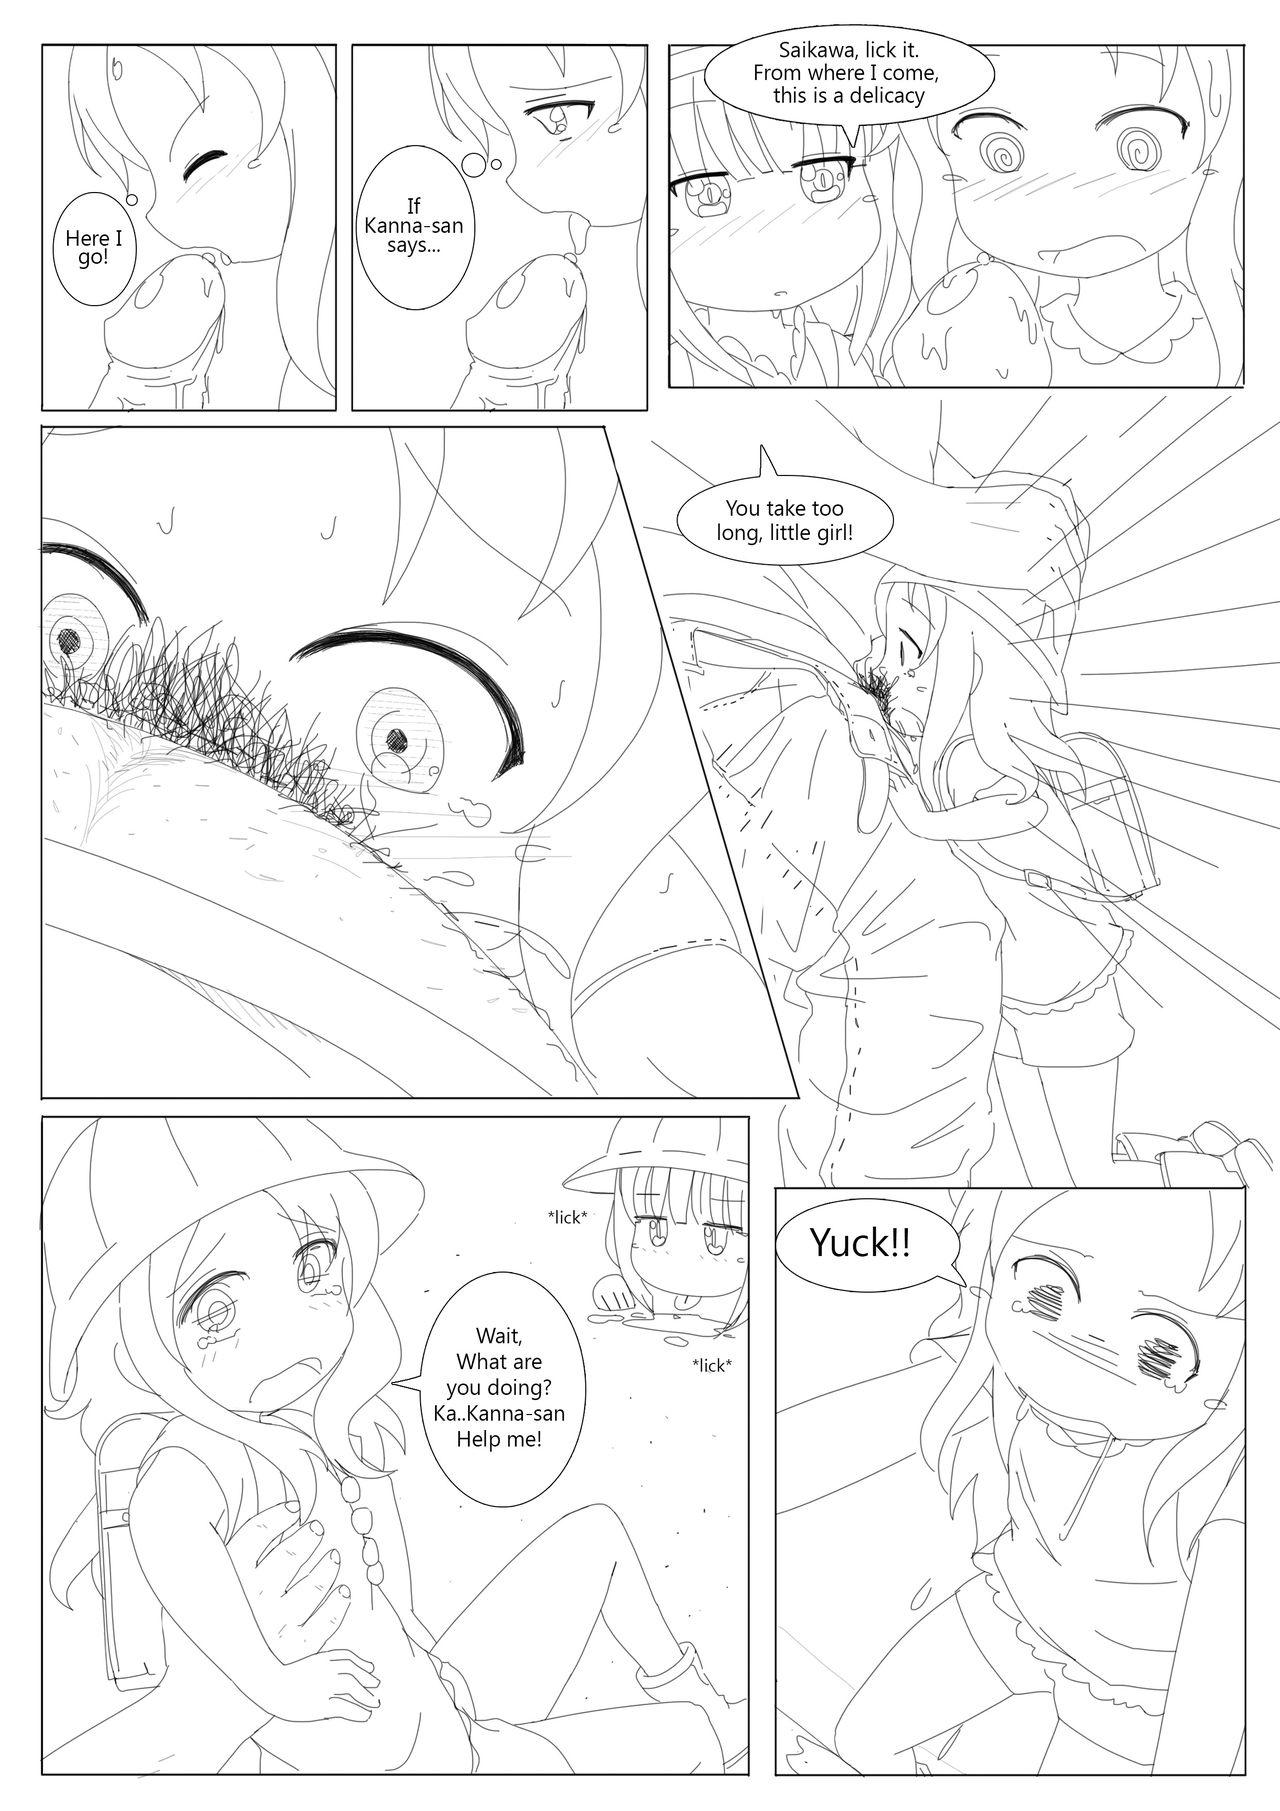 ComicTED Vol 2 [Radioactive Cockroach] Ted The Ero Dinasty (The Cum Hungry Dragon Loli) 2